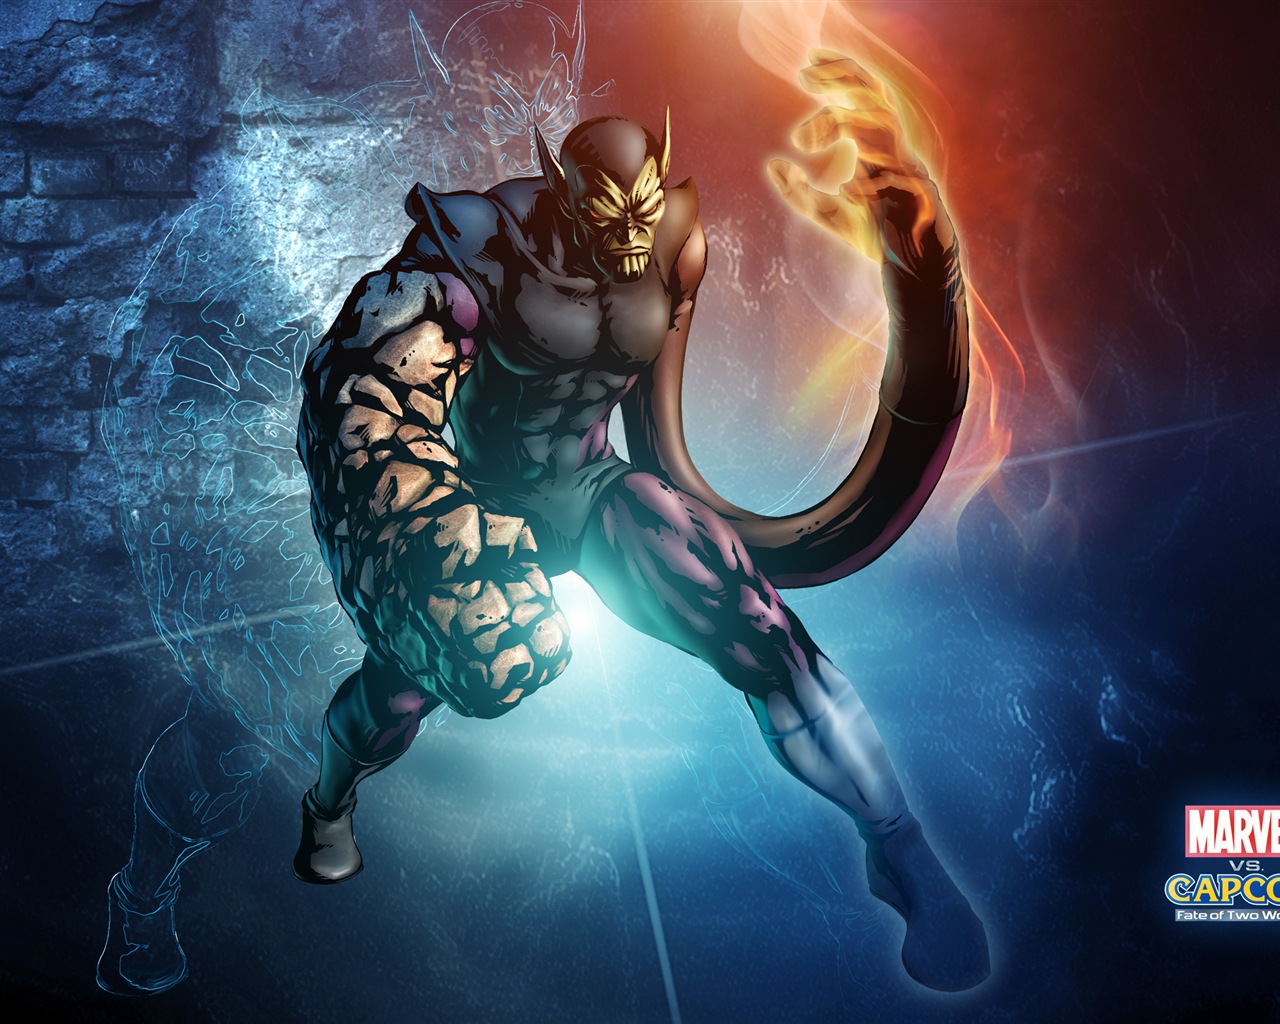 Marvel VS. Capcom 3: Fate of Two Worlds HD game wallpapers #24 - 1280x1024